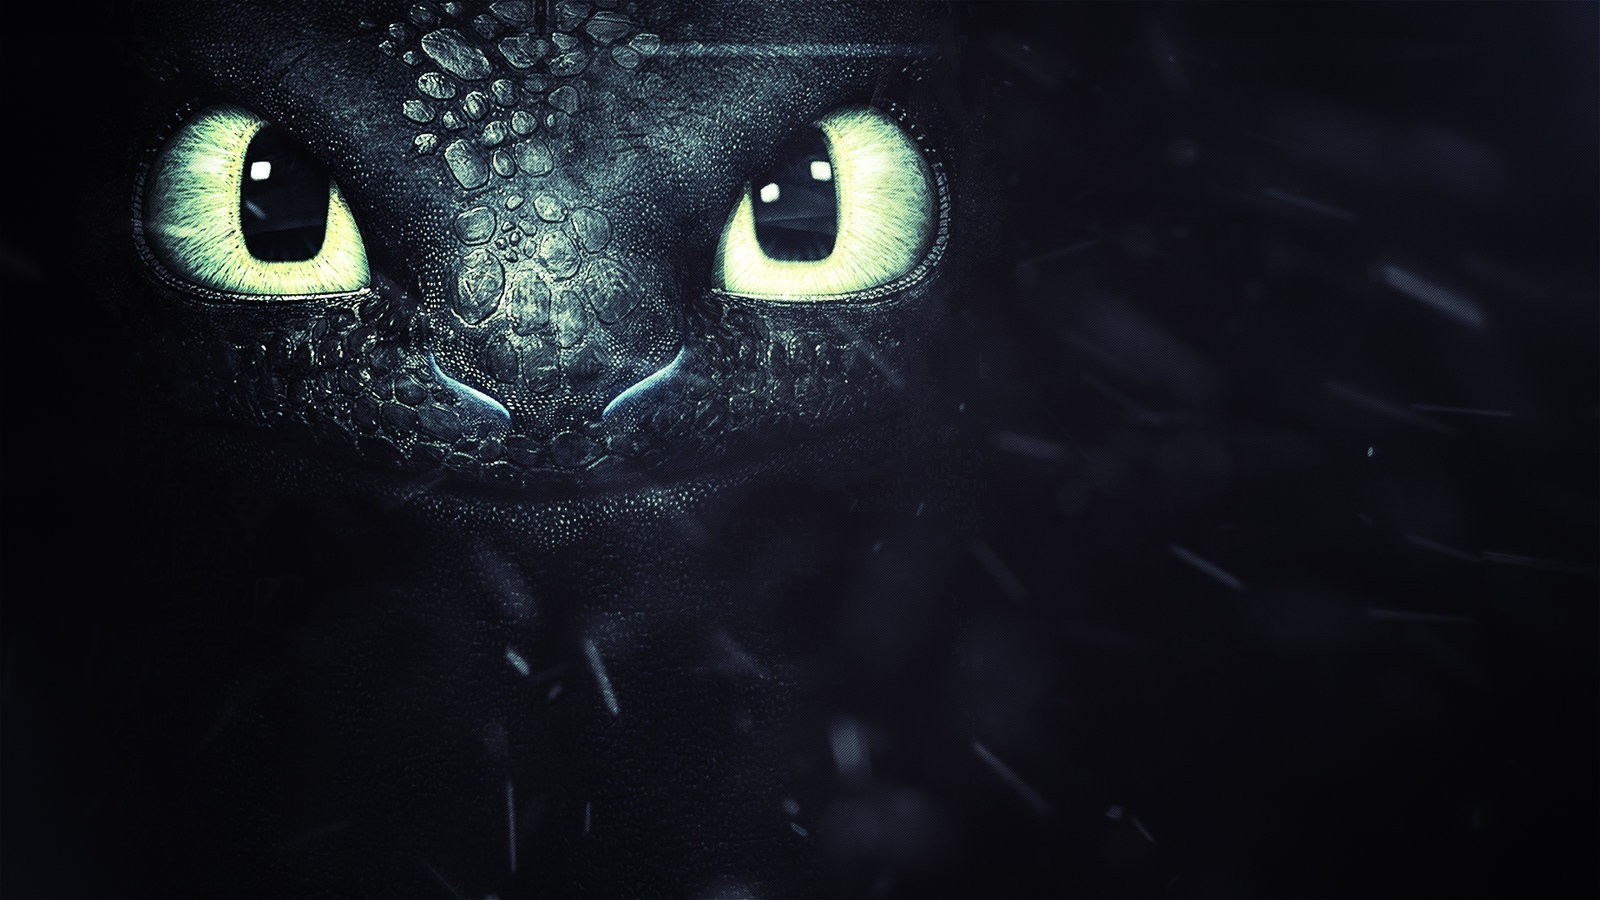 How To Train Your Dragon 2, Toothless, Movies Wallpapers ...